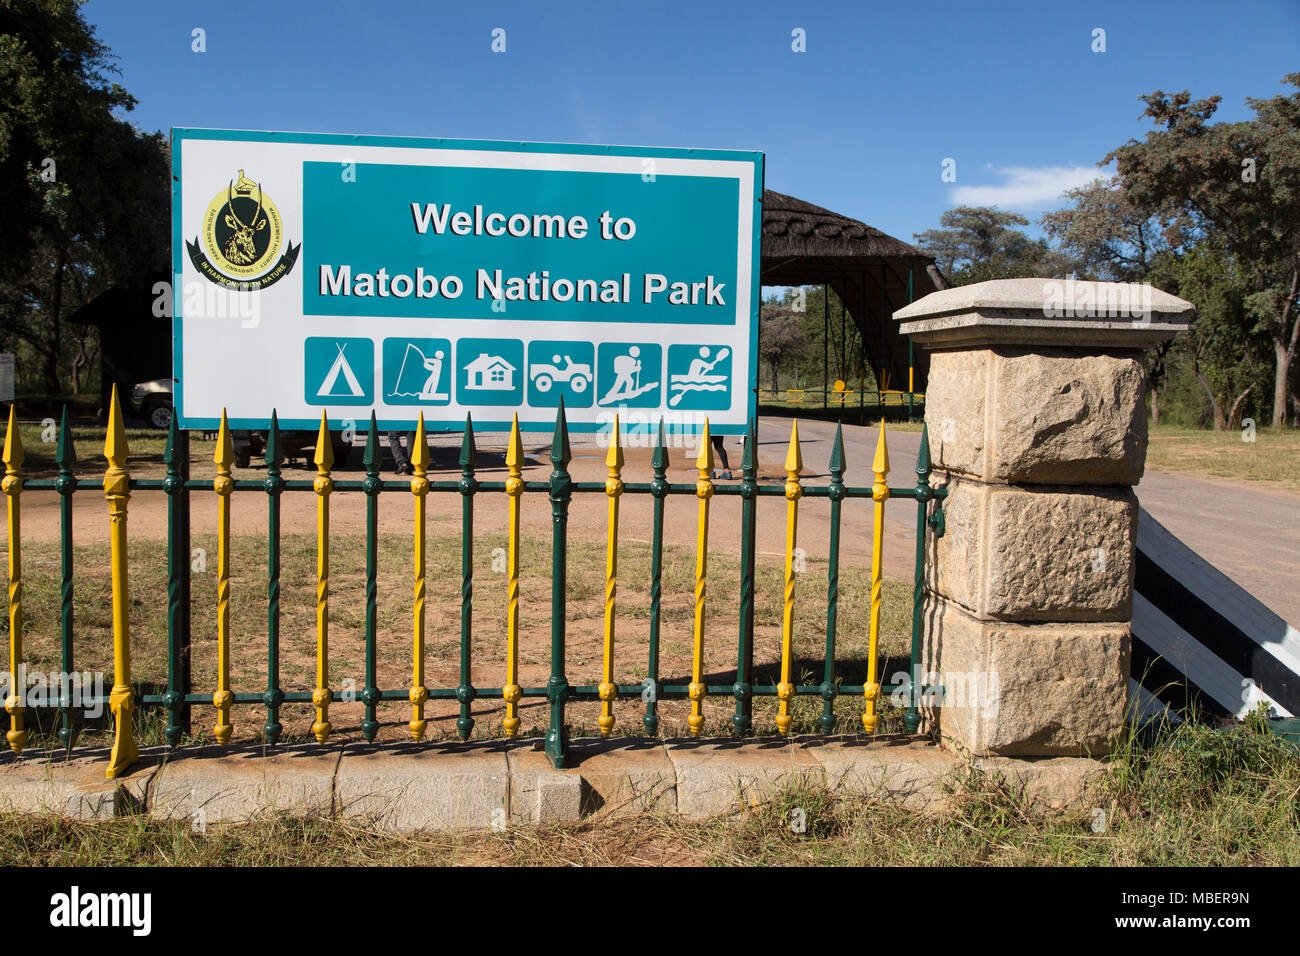 A sign welcoming people to Matobo National Park in Zimbabwe. The national park is a UNESCO World Heritage Site. Stock Photo